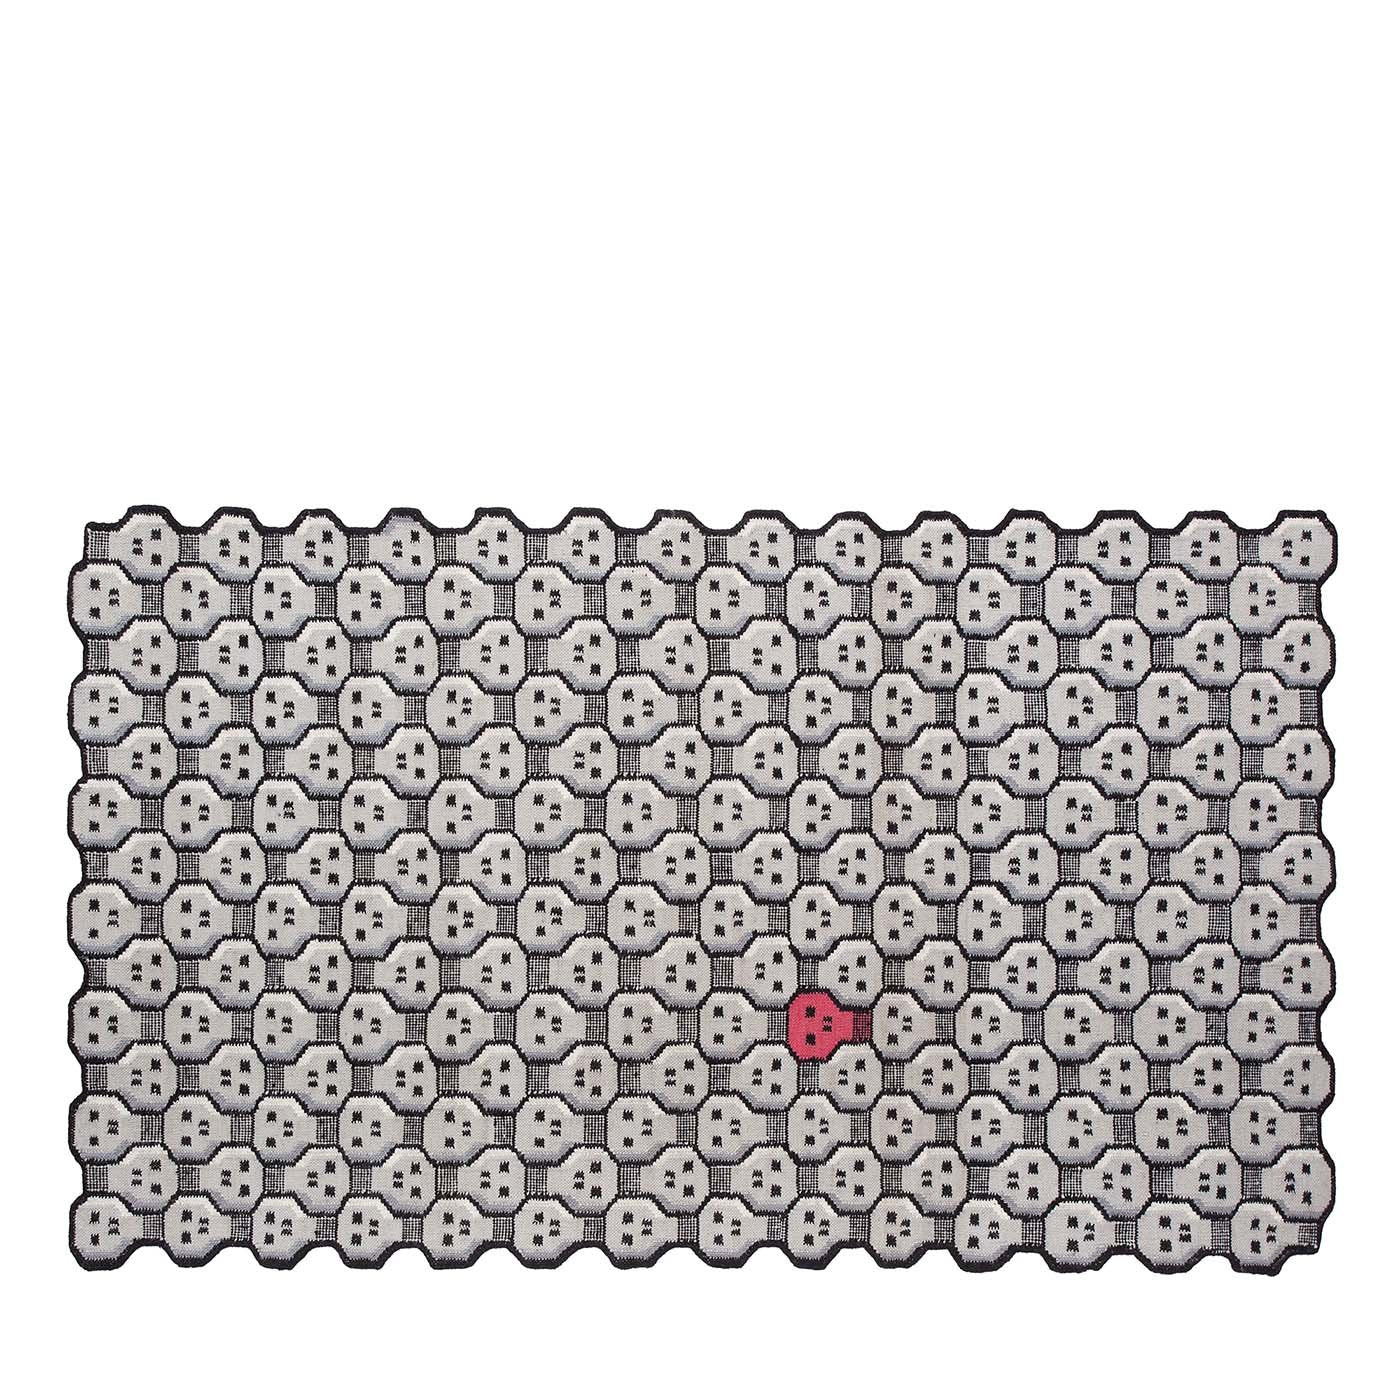 Knock Out Rug by Giulio Iacchetii - Main view